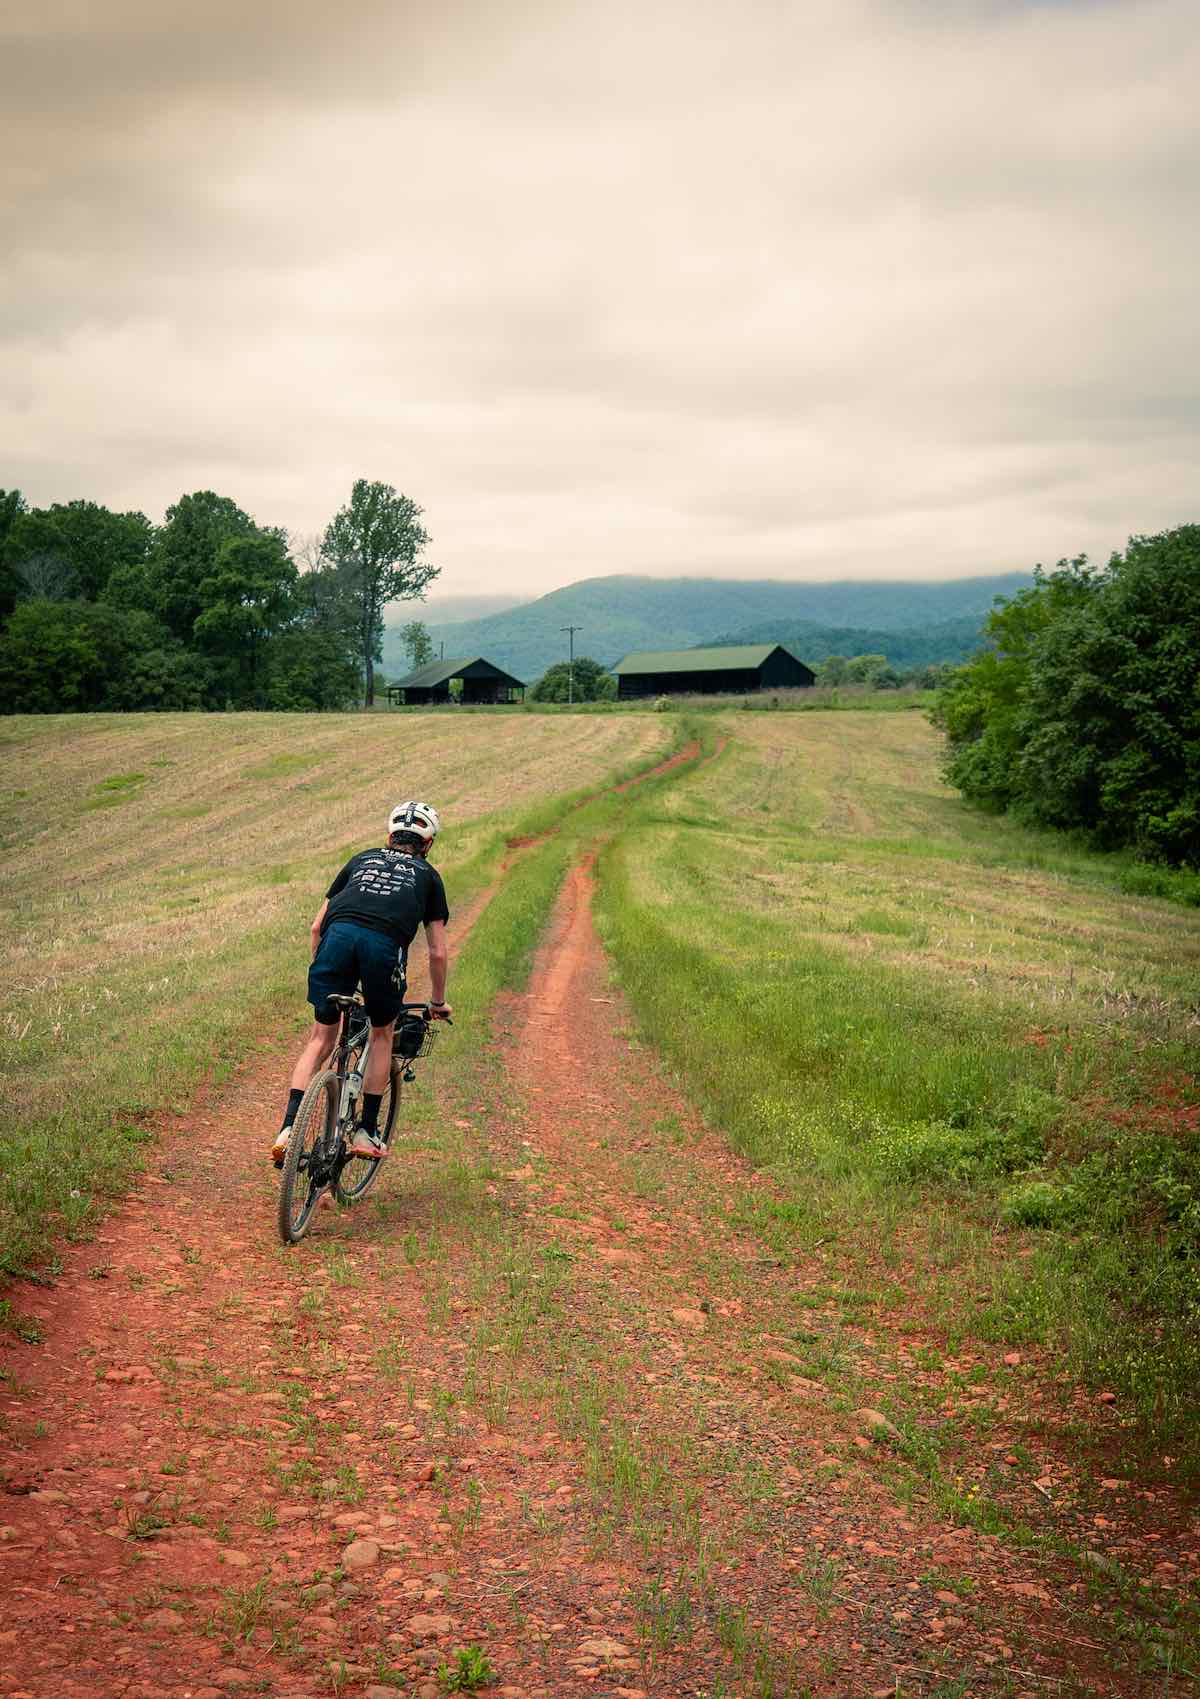 bikerumor pic of the day cyclist on dirt road with grassy field on either side and trees and barn in the distance.